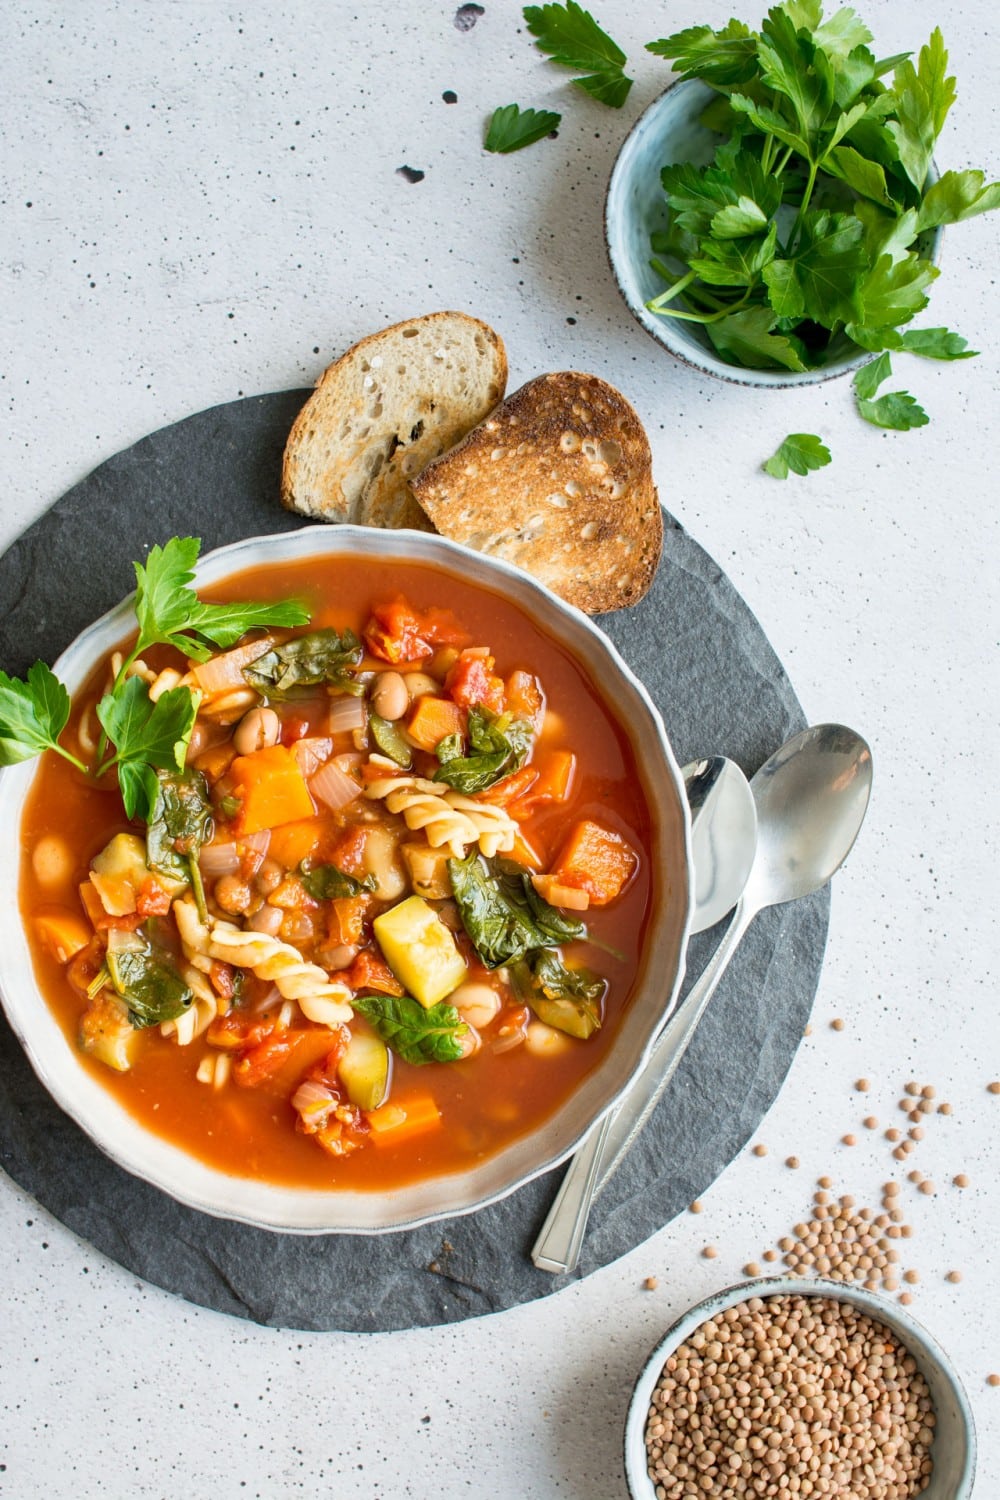 15 Delicious Minestrone Soup Recipes: Winter Vegetable Minestrone Soup